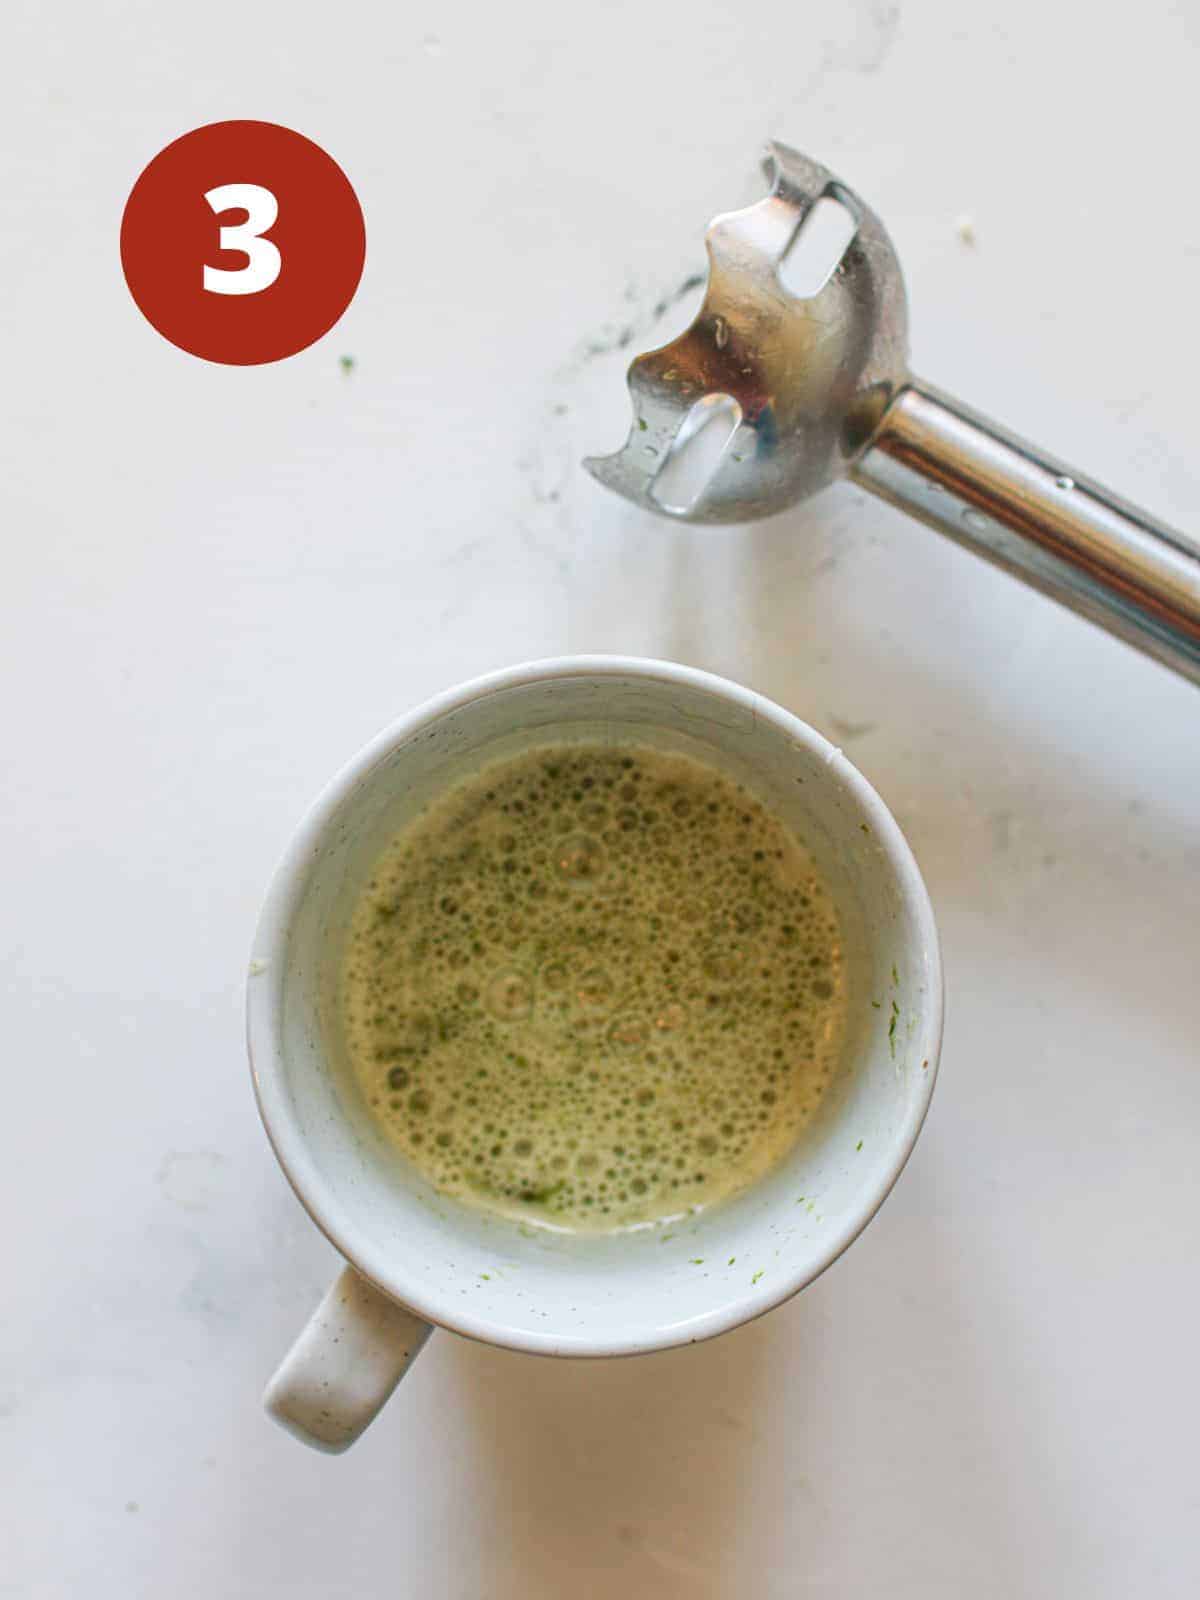 A cup of dressing in a white mug with a hand blender off to the side on a white marble background. A dark red circle with a white '3' is in the upper left corner.